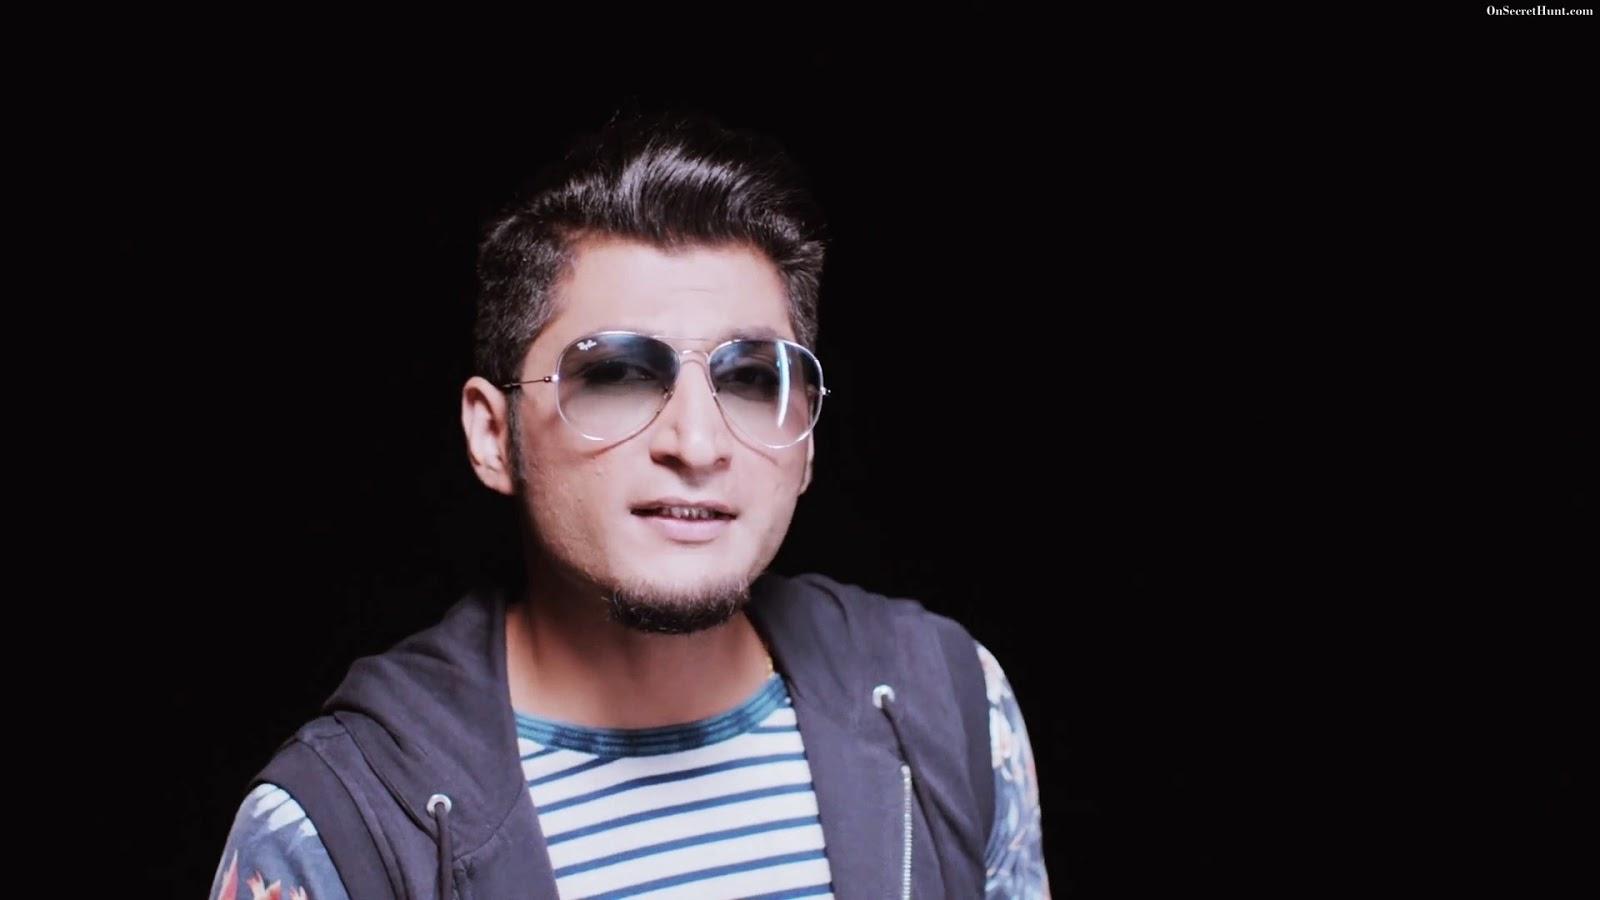 Bilal saeed new pic 2017 download picture free download